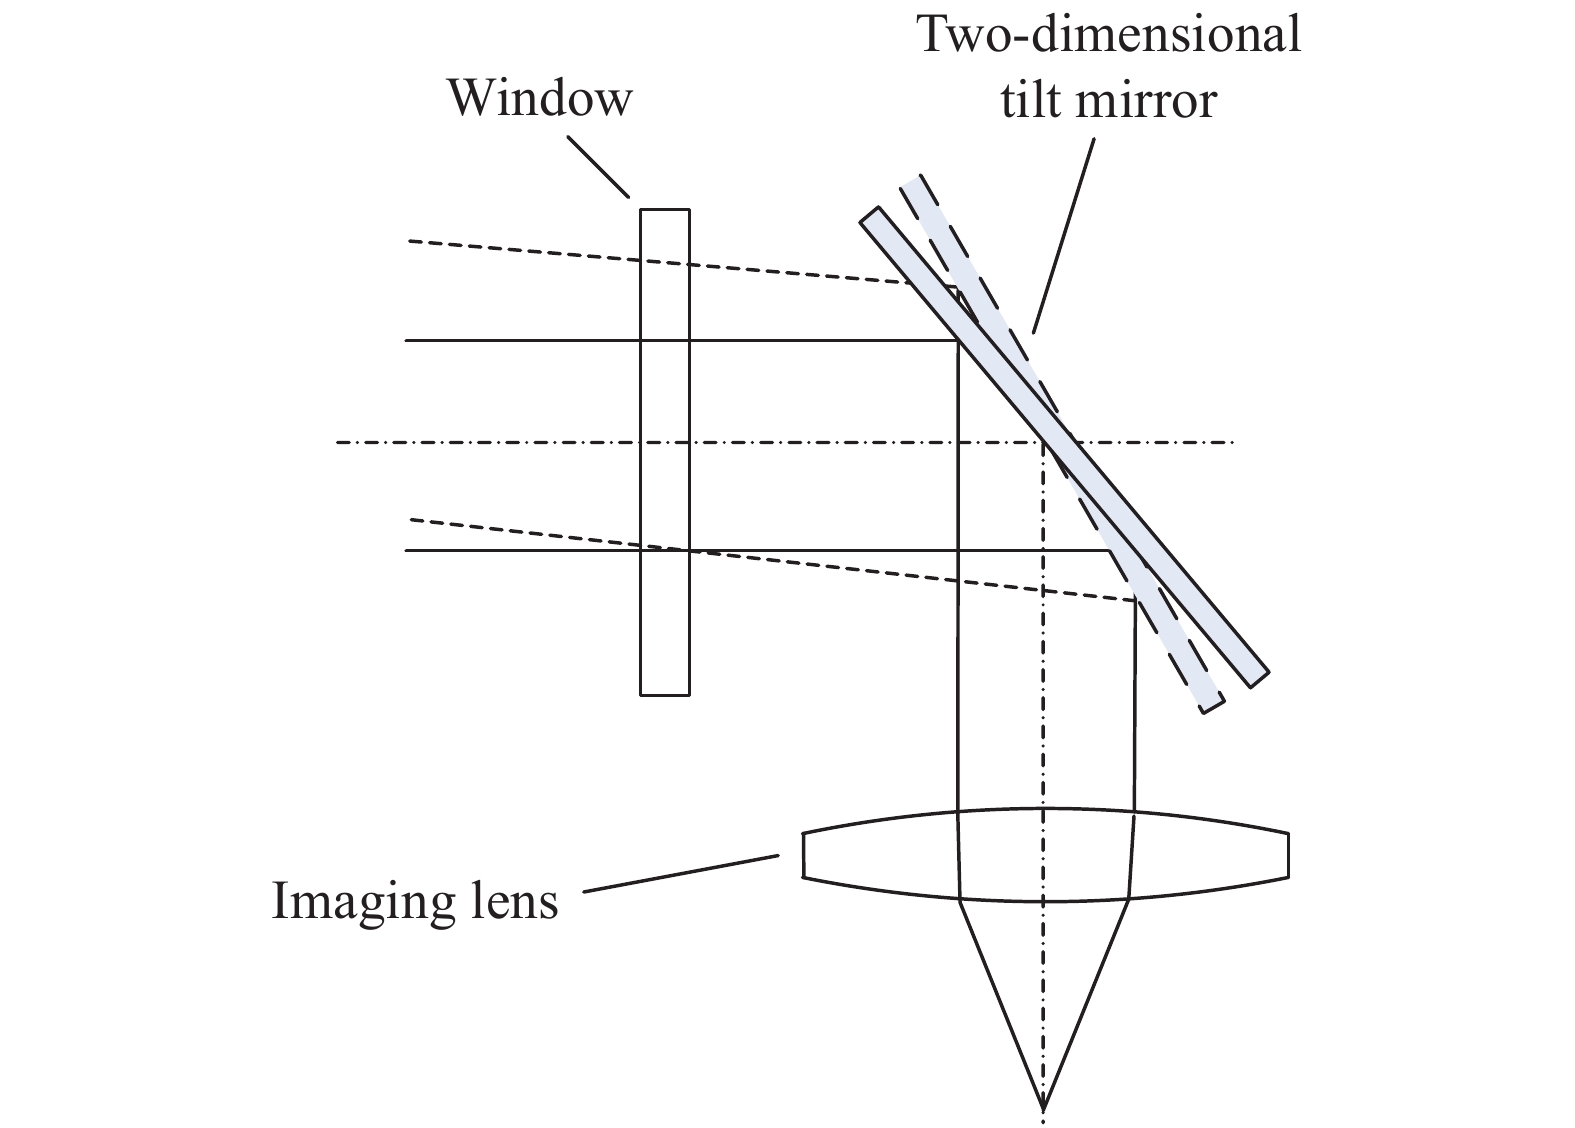 Object space scanning optical system with tilt mirror